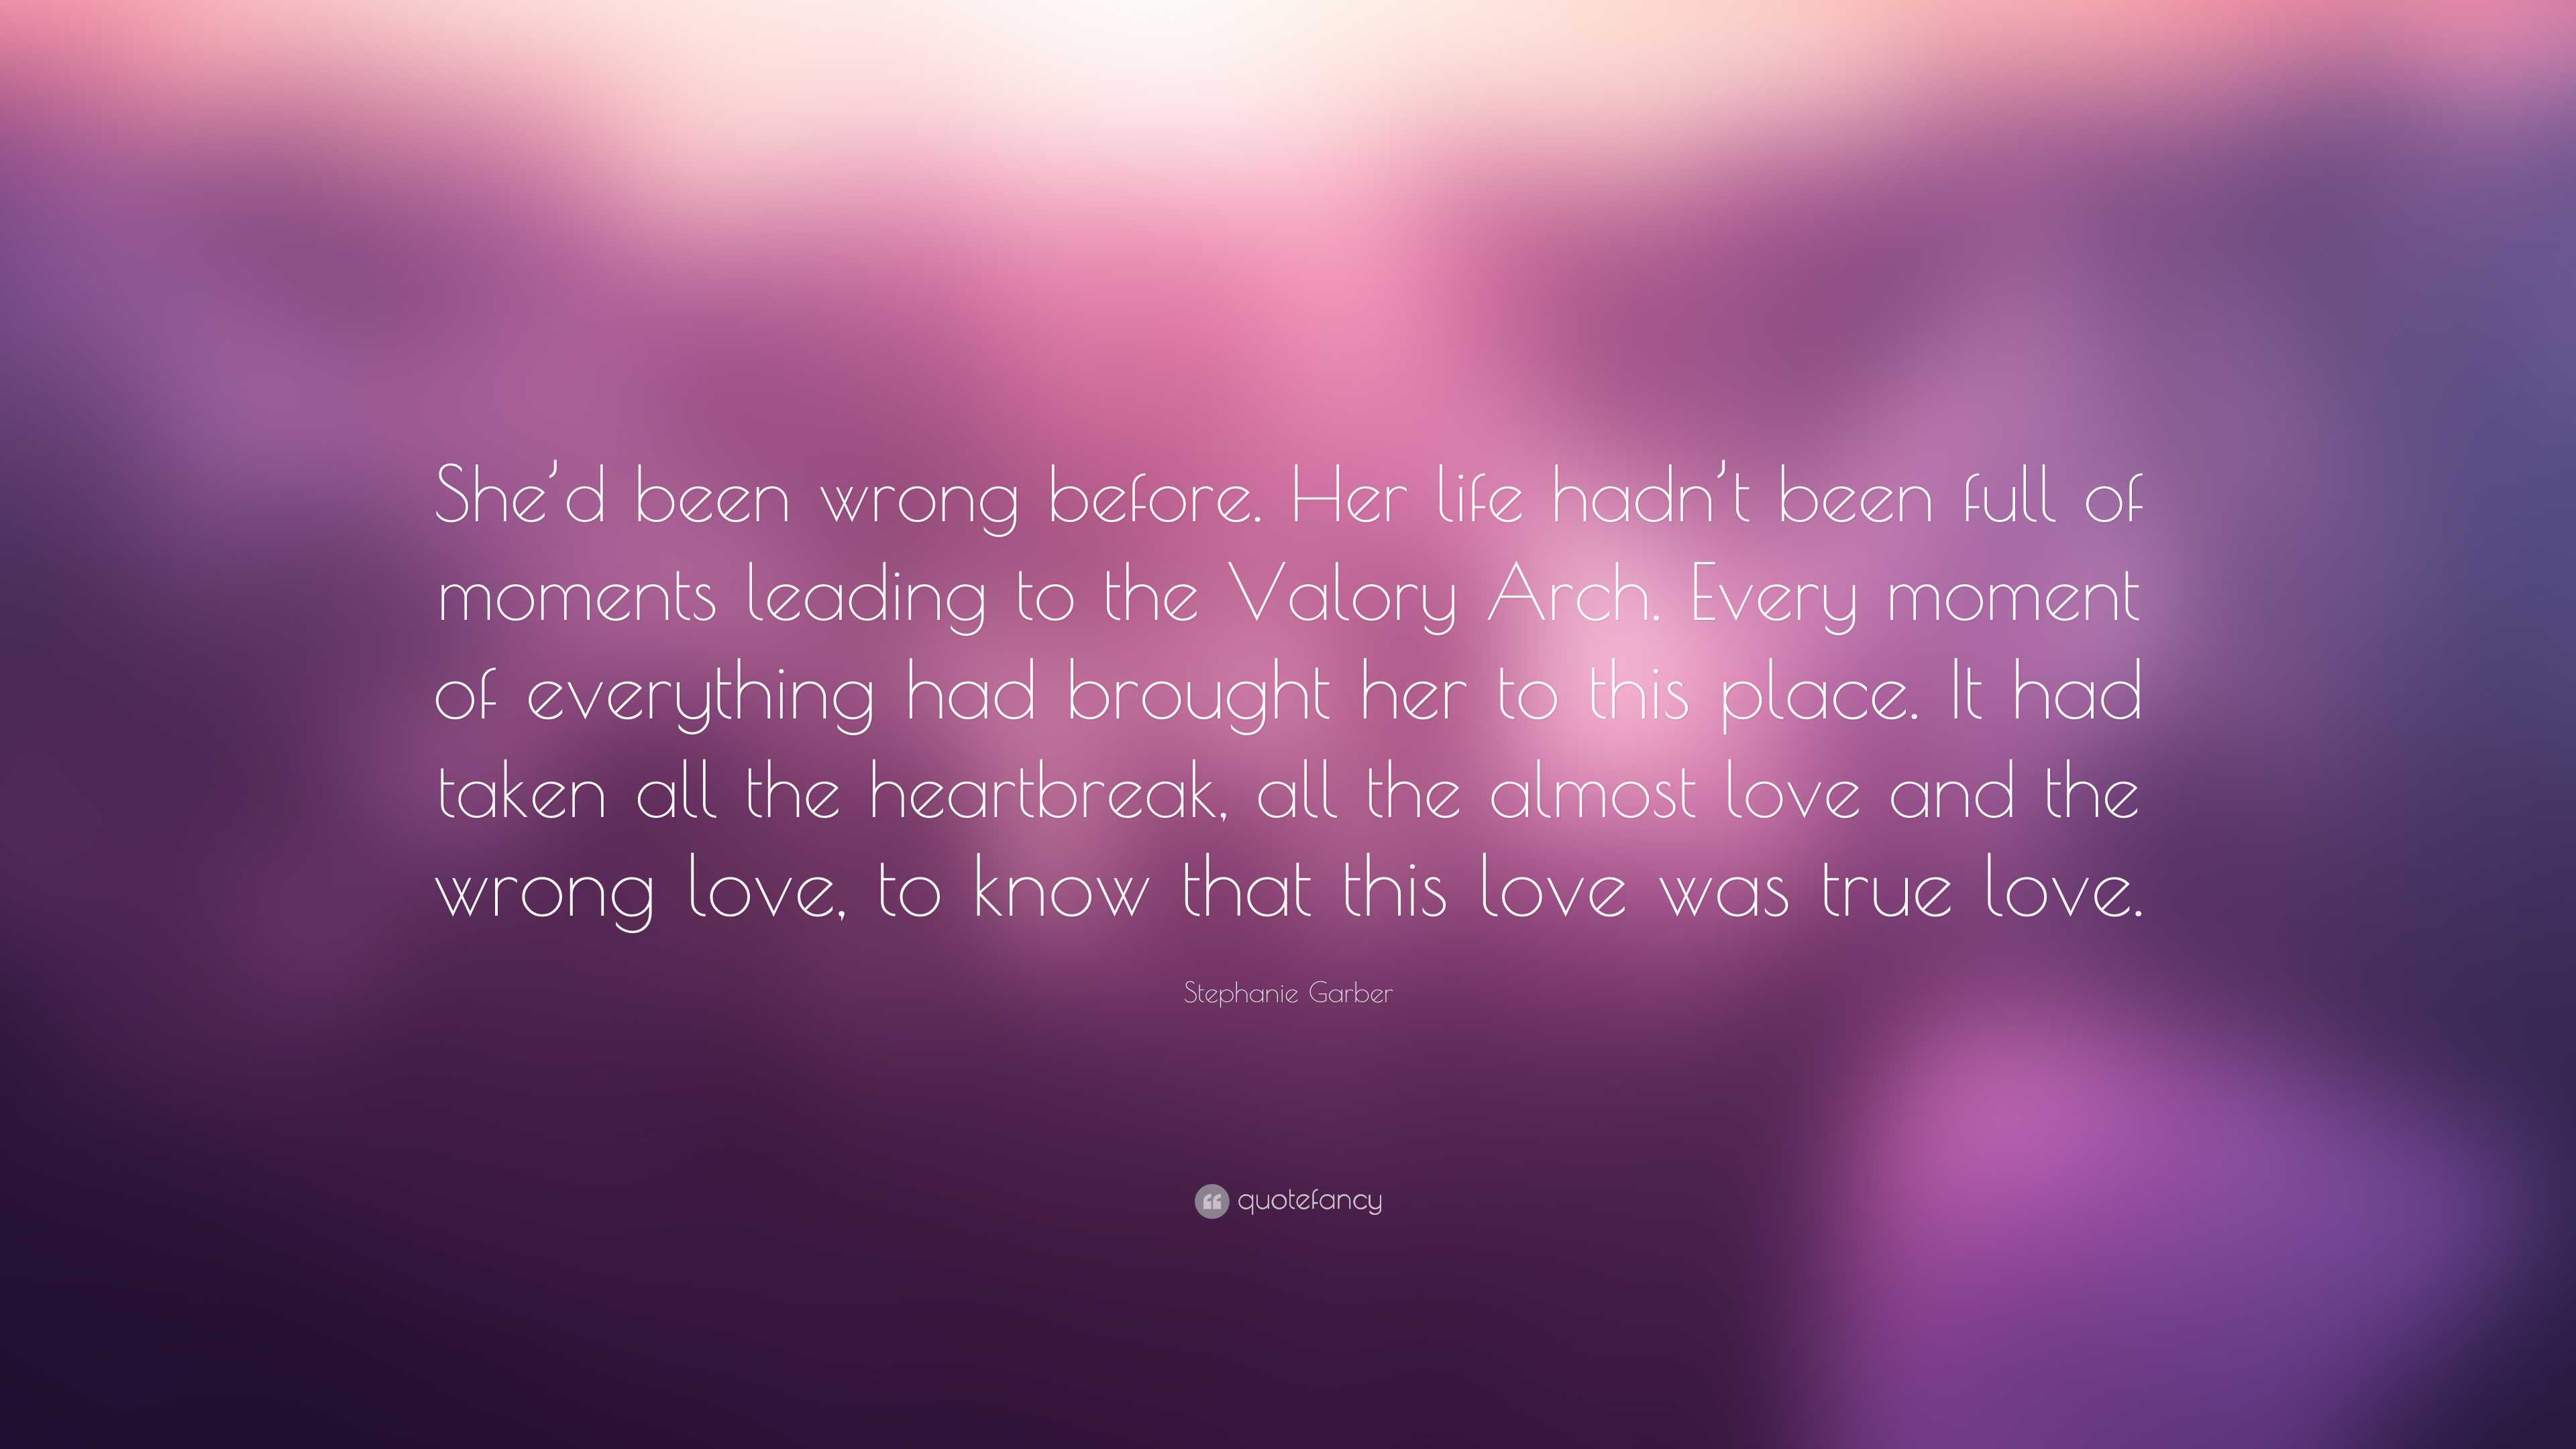 Stephanie Garber Quote: “She’d been wrong before. Her life hadn’t been ...